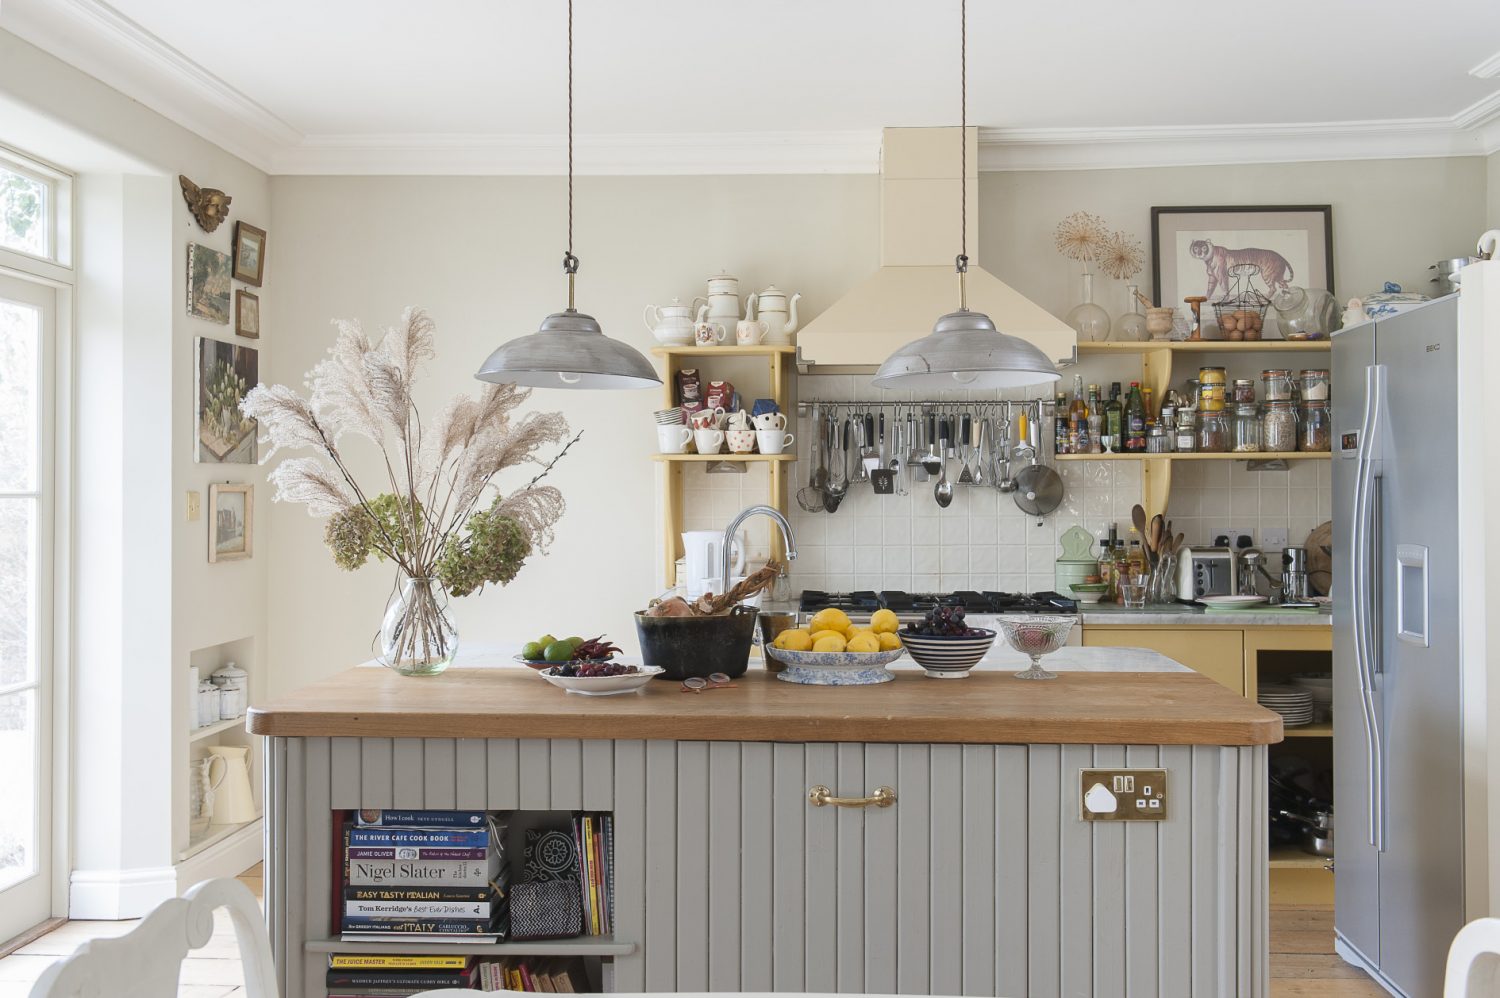 The ‘working end’ of the kitchen is a cook’s dream, with utensils and ingredients close to hand and an island unit – with half-oak-half-Carrara marble surface – allowing Emma to talk to guests while preparing food. The warm yellow of the painted shelving units is a nod to Emma’s Norwegian heritage